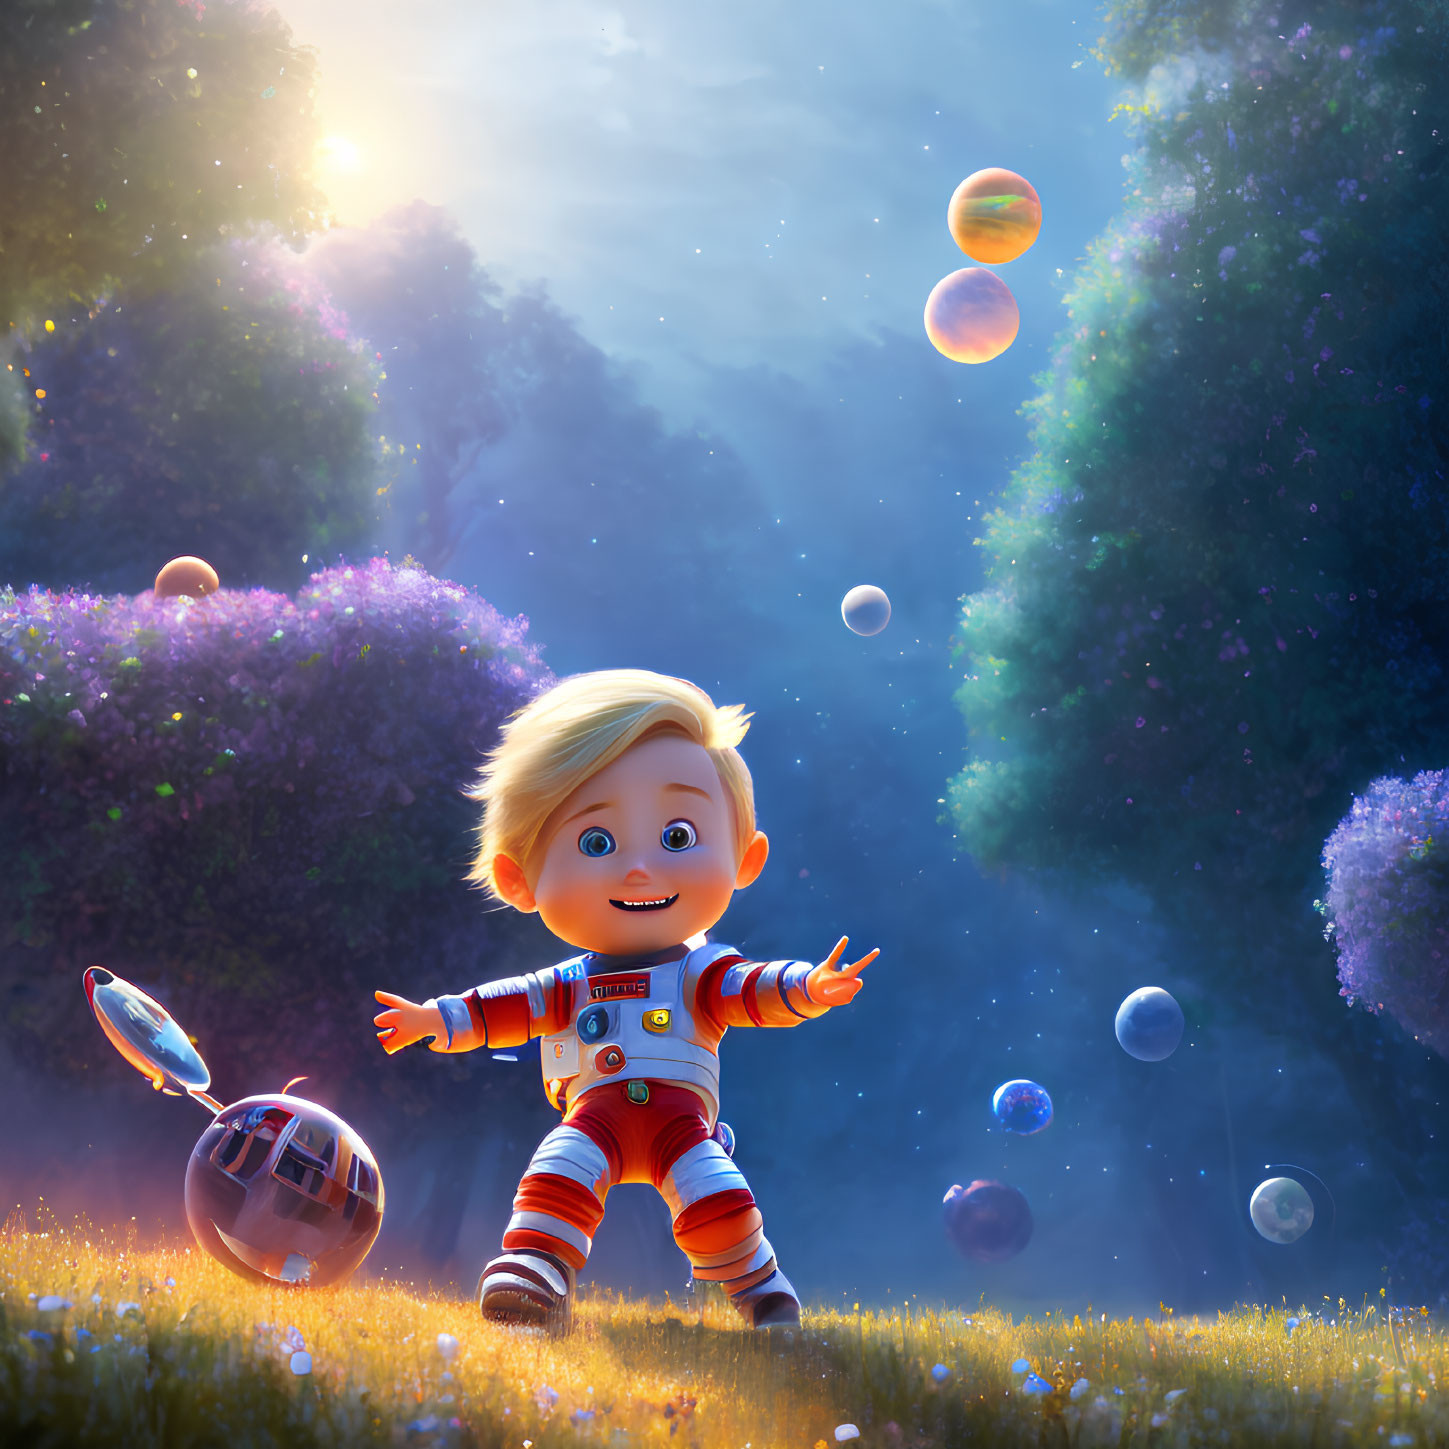 Child Astronaut Playing with Planets in Mystical Forest Scene